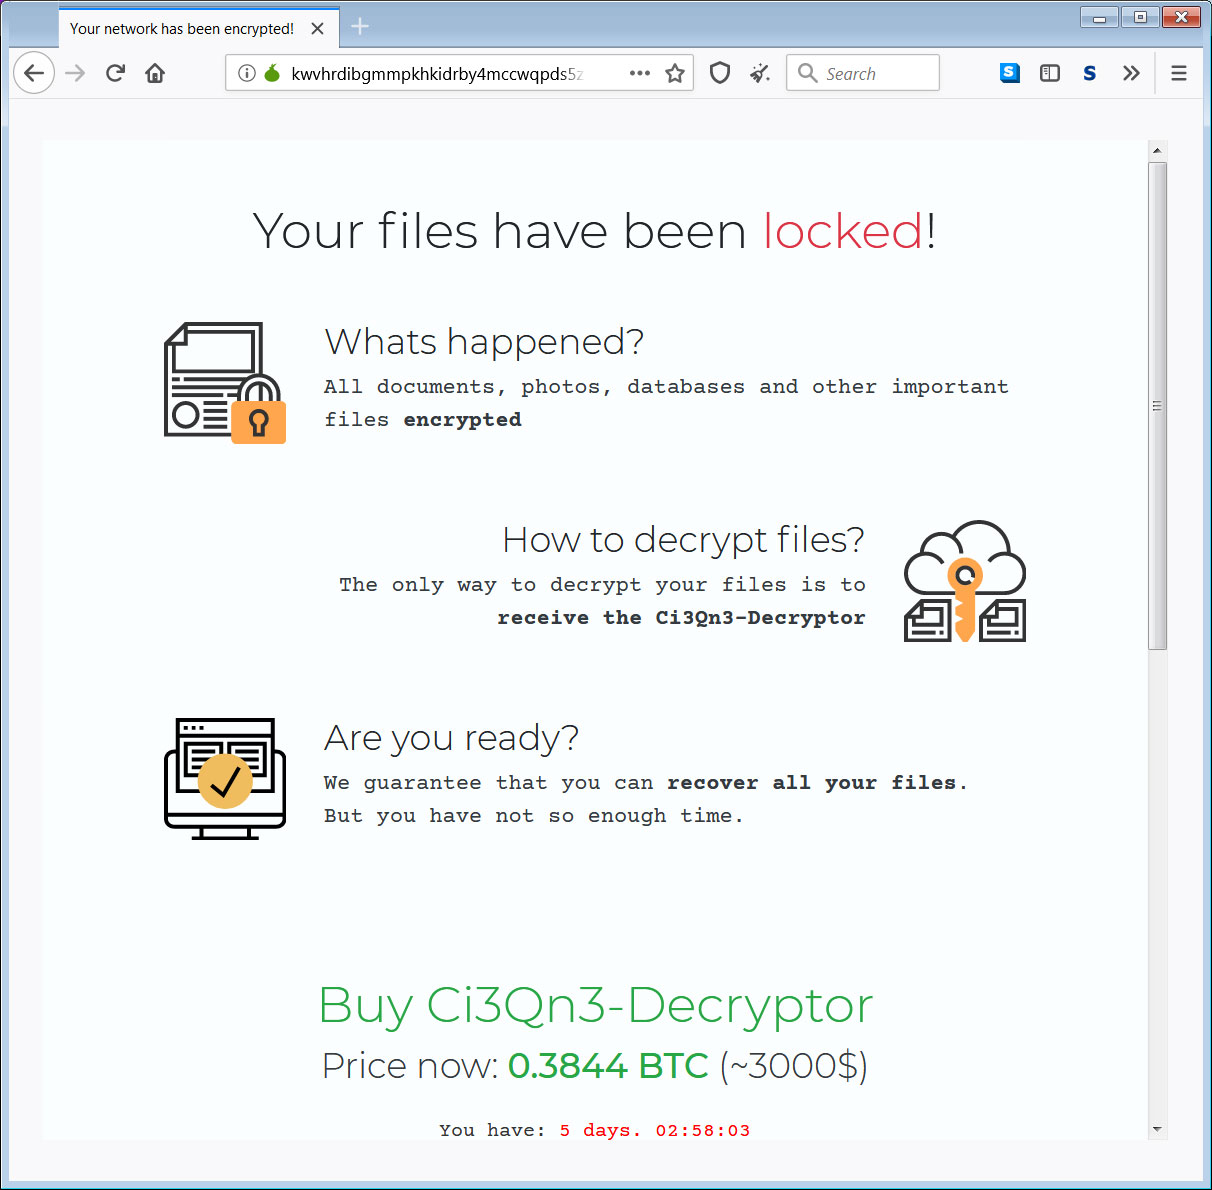 Ako Ransomware: Another Day, Another Infection Attacking Businesses